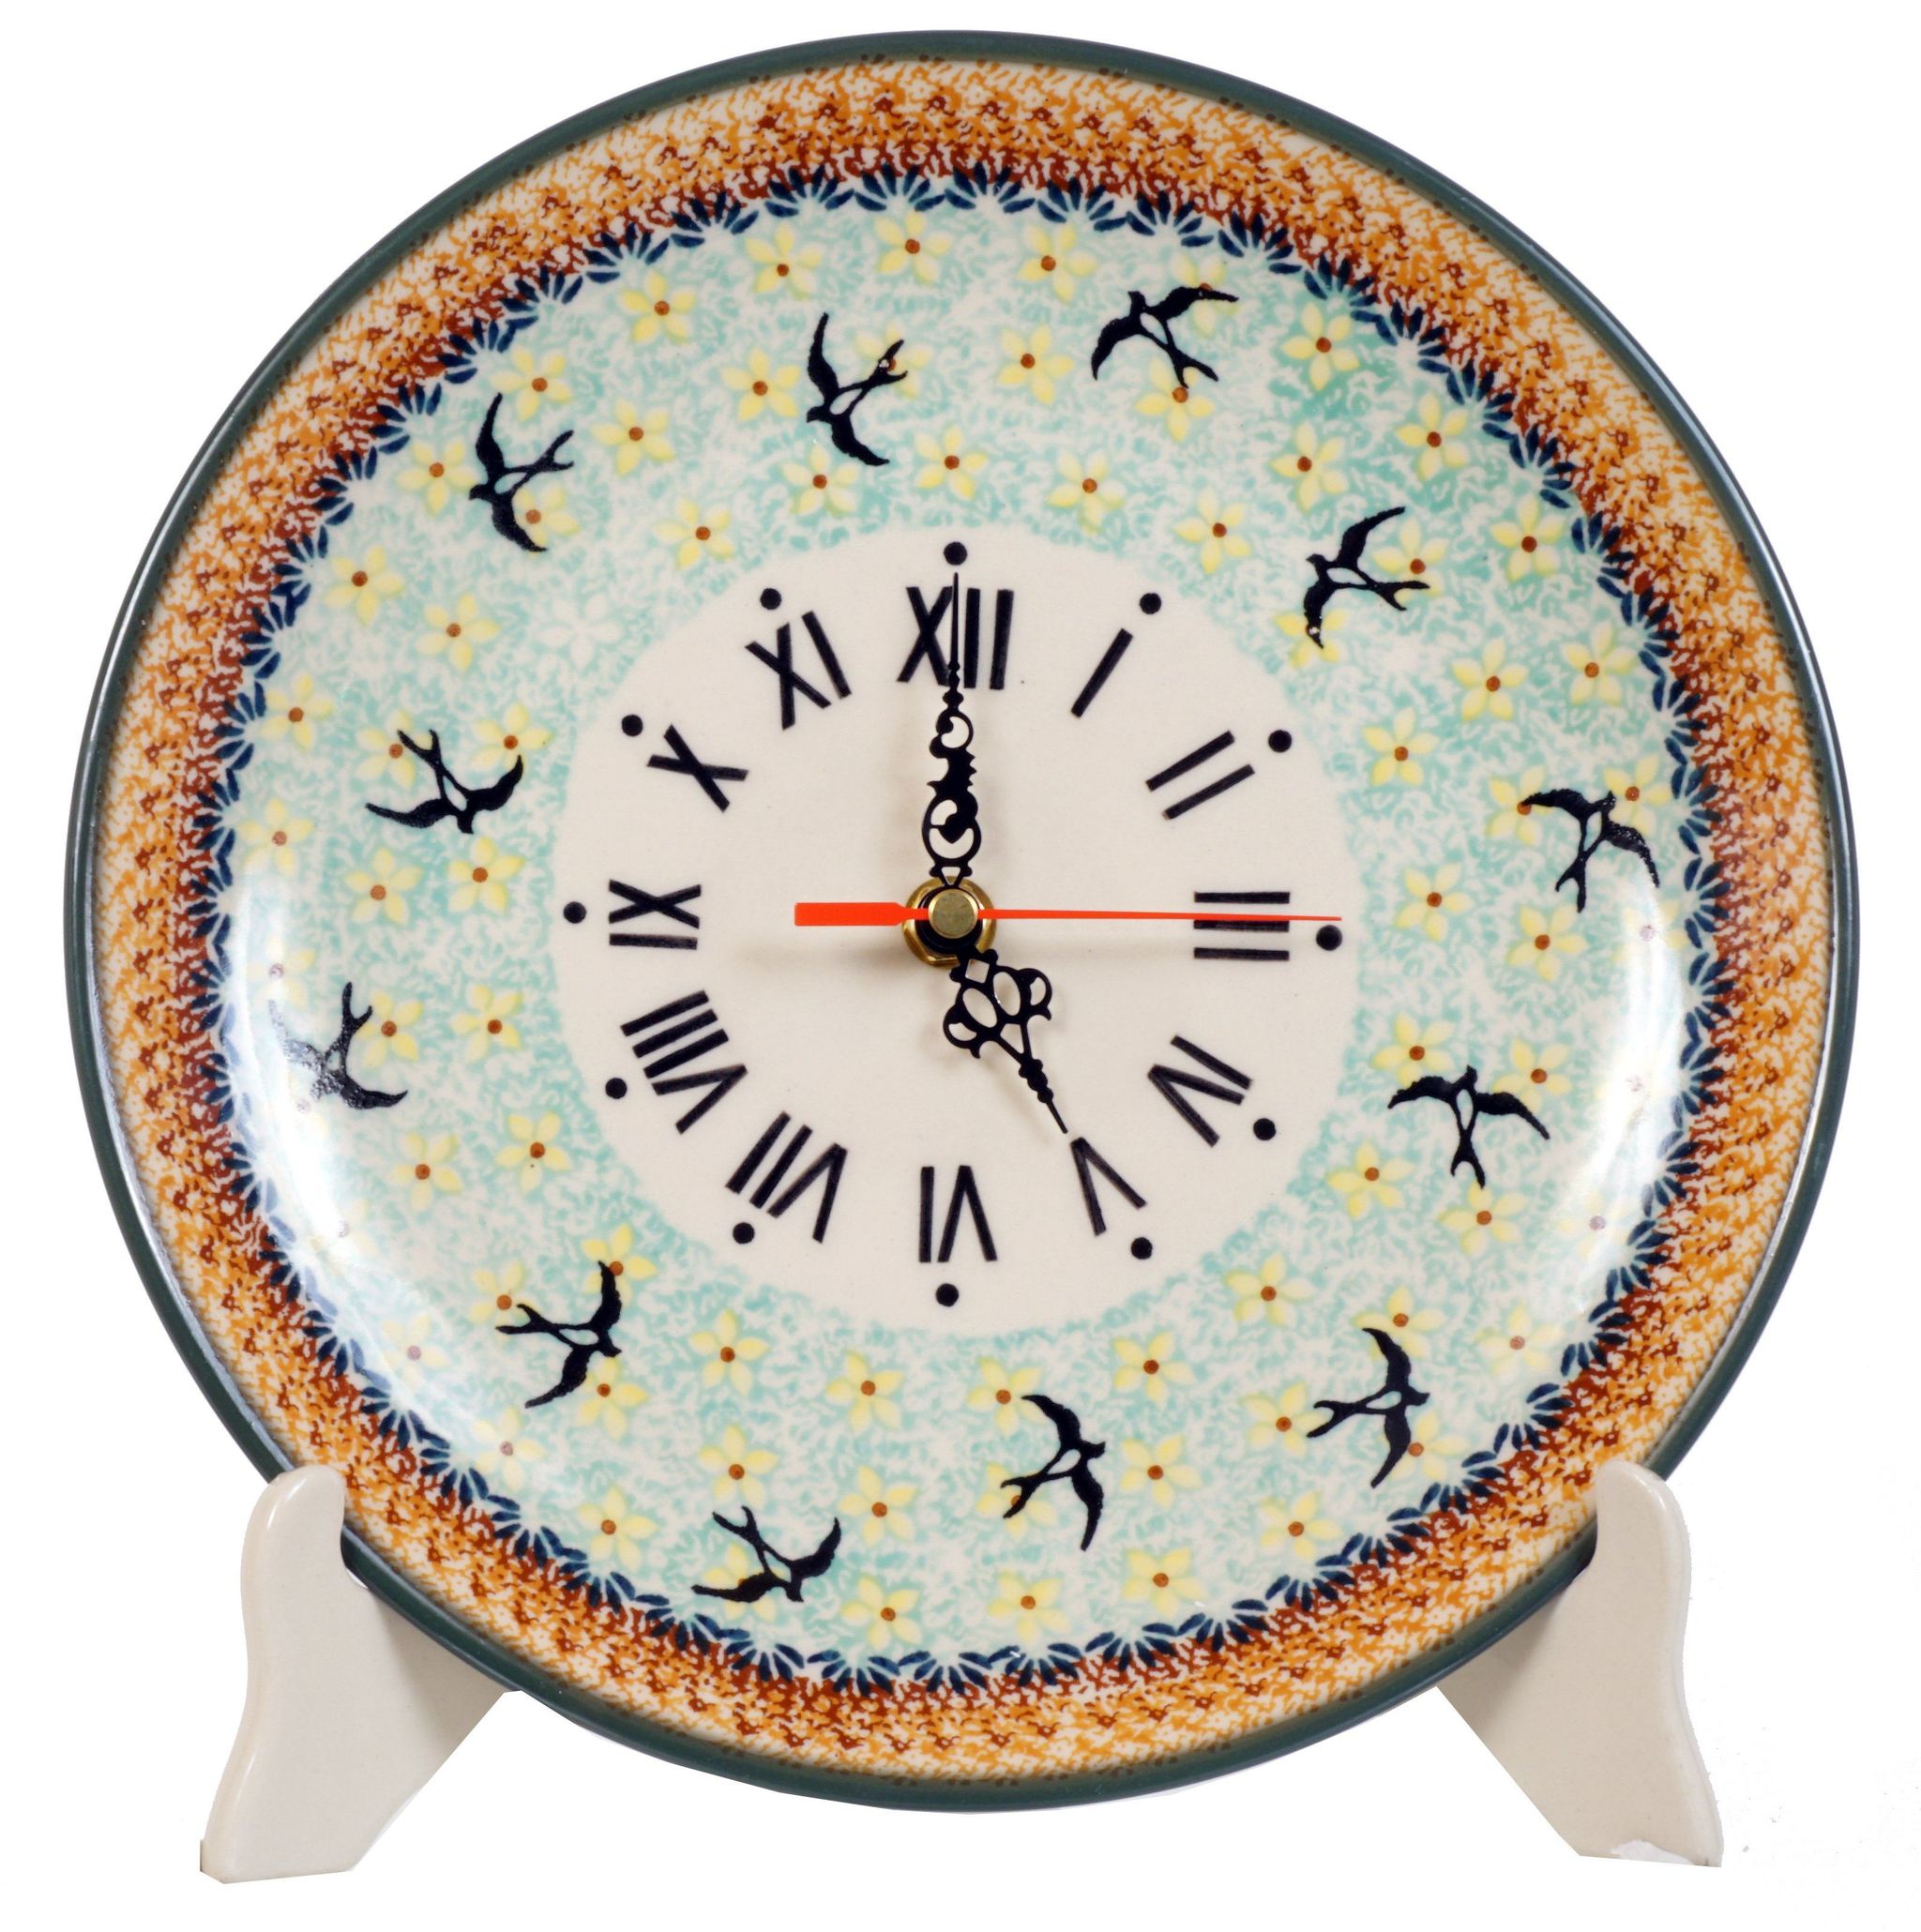 Clocks and Lamps - The Polish Pottery Outlet